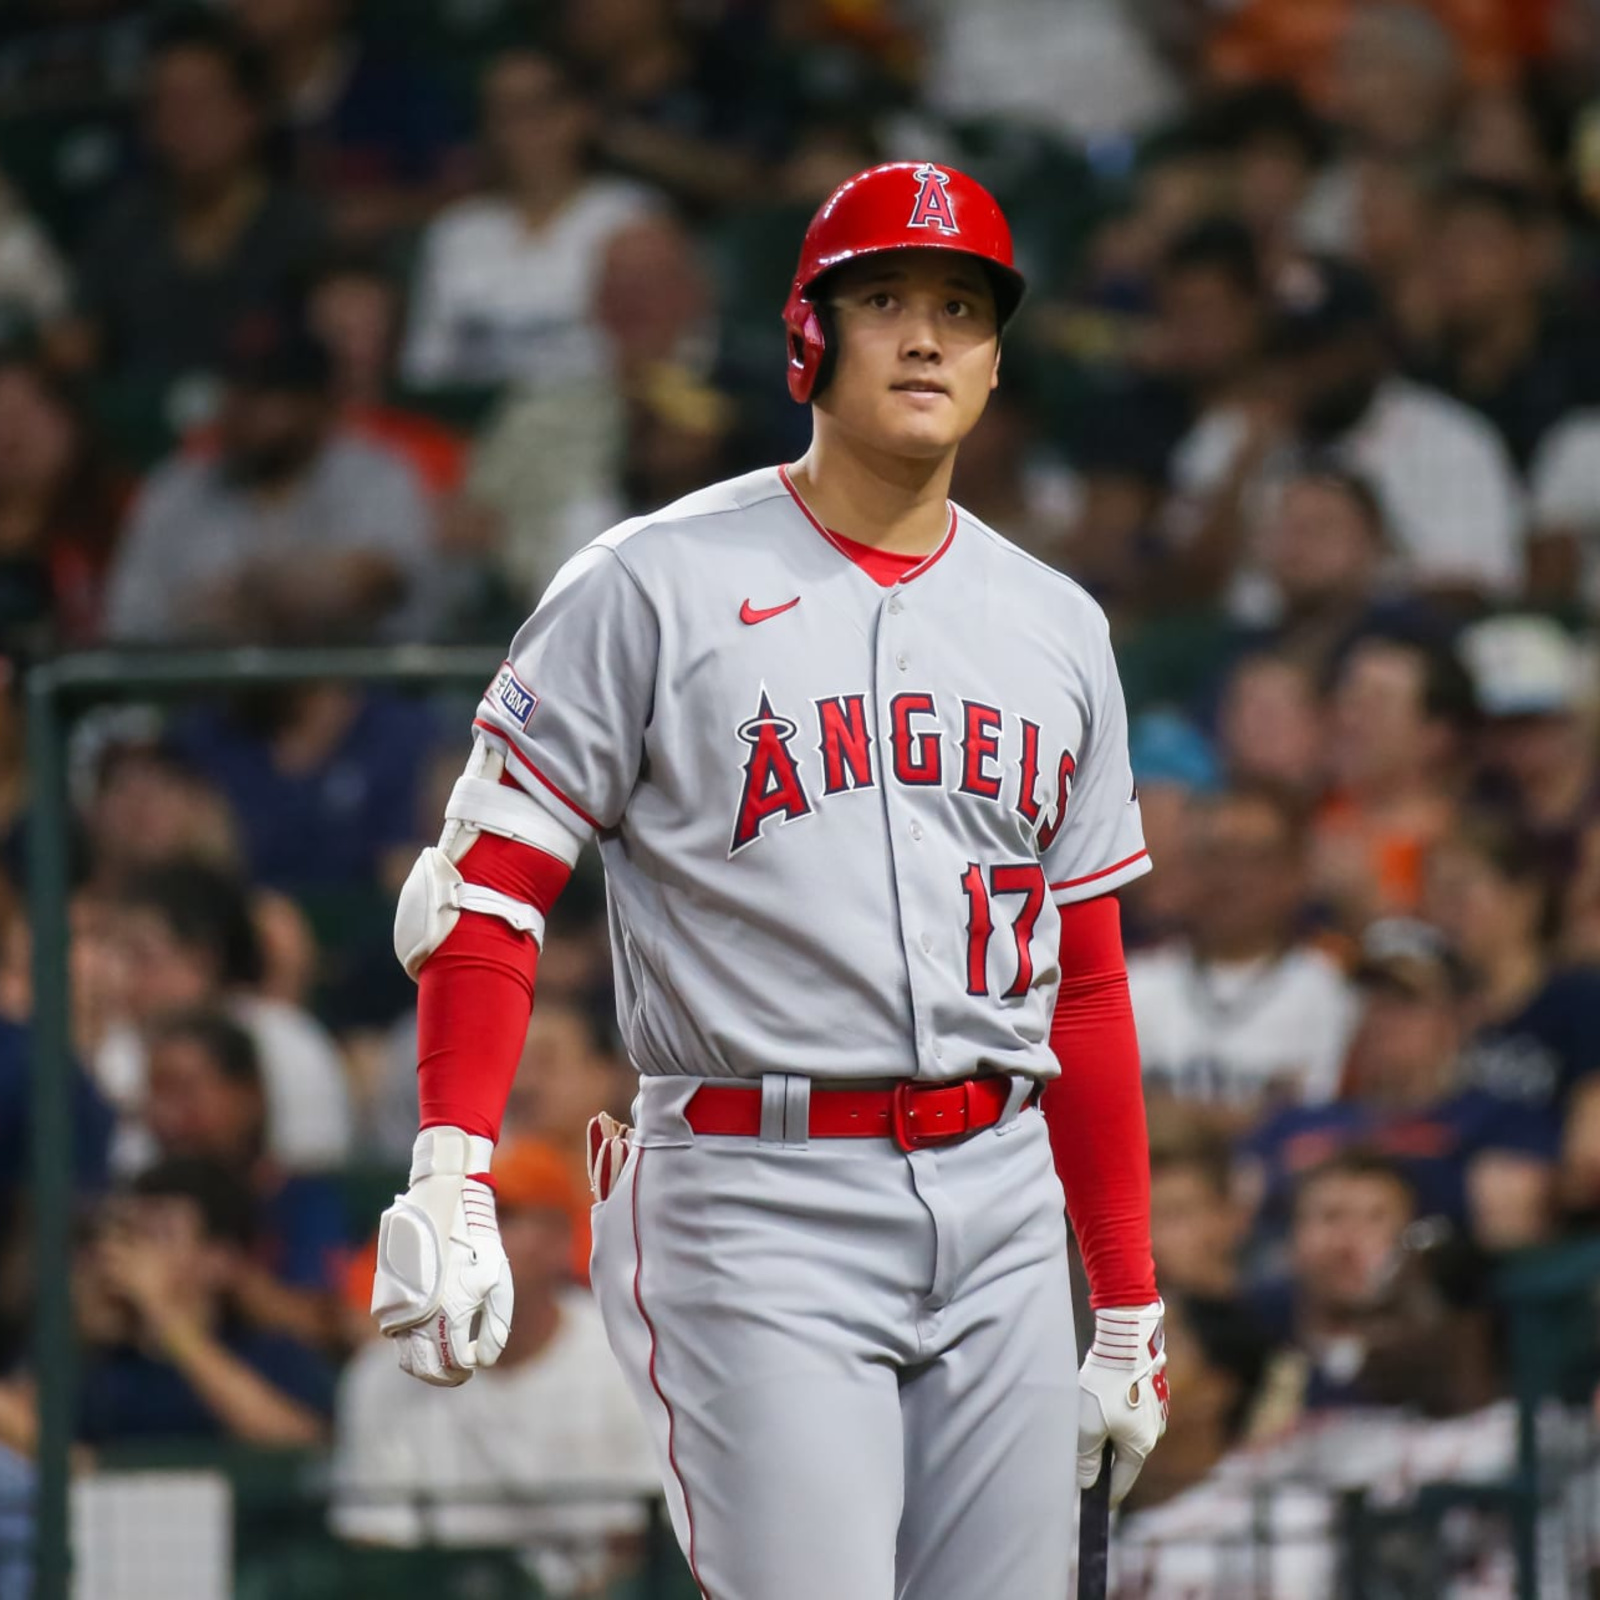 BASEBALL, Shohei Ohtani Pulled From Scheduled Start Due to Sore Arm